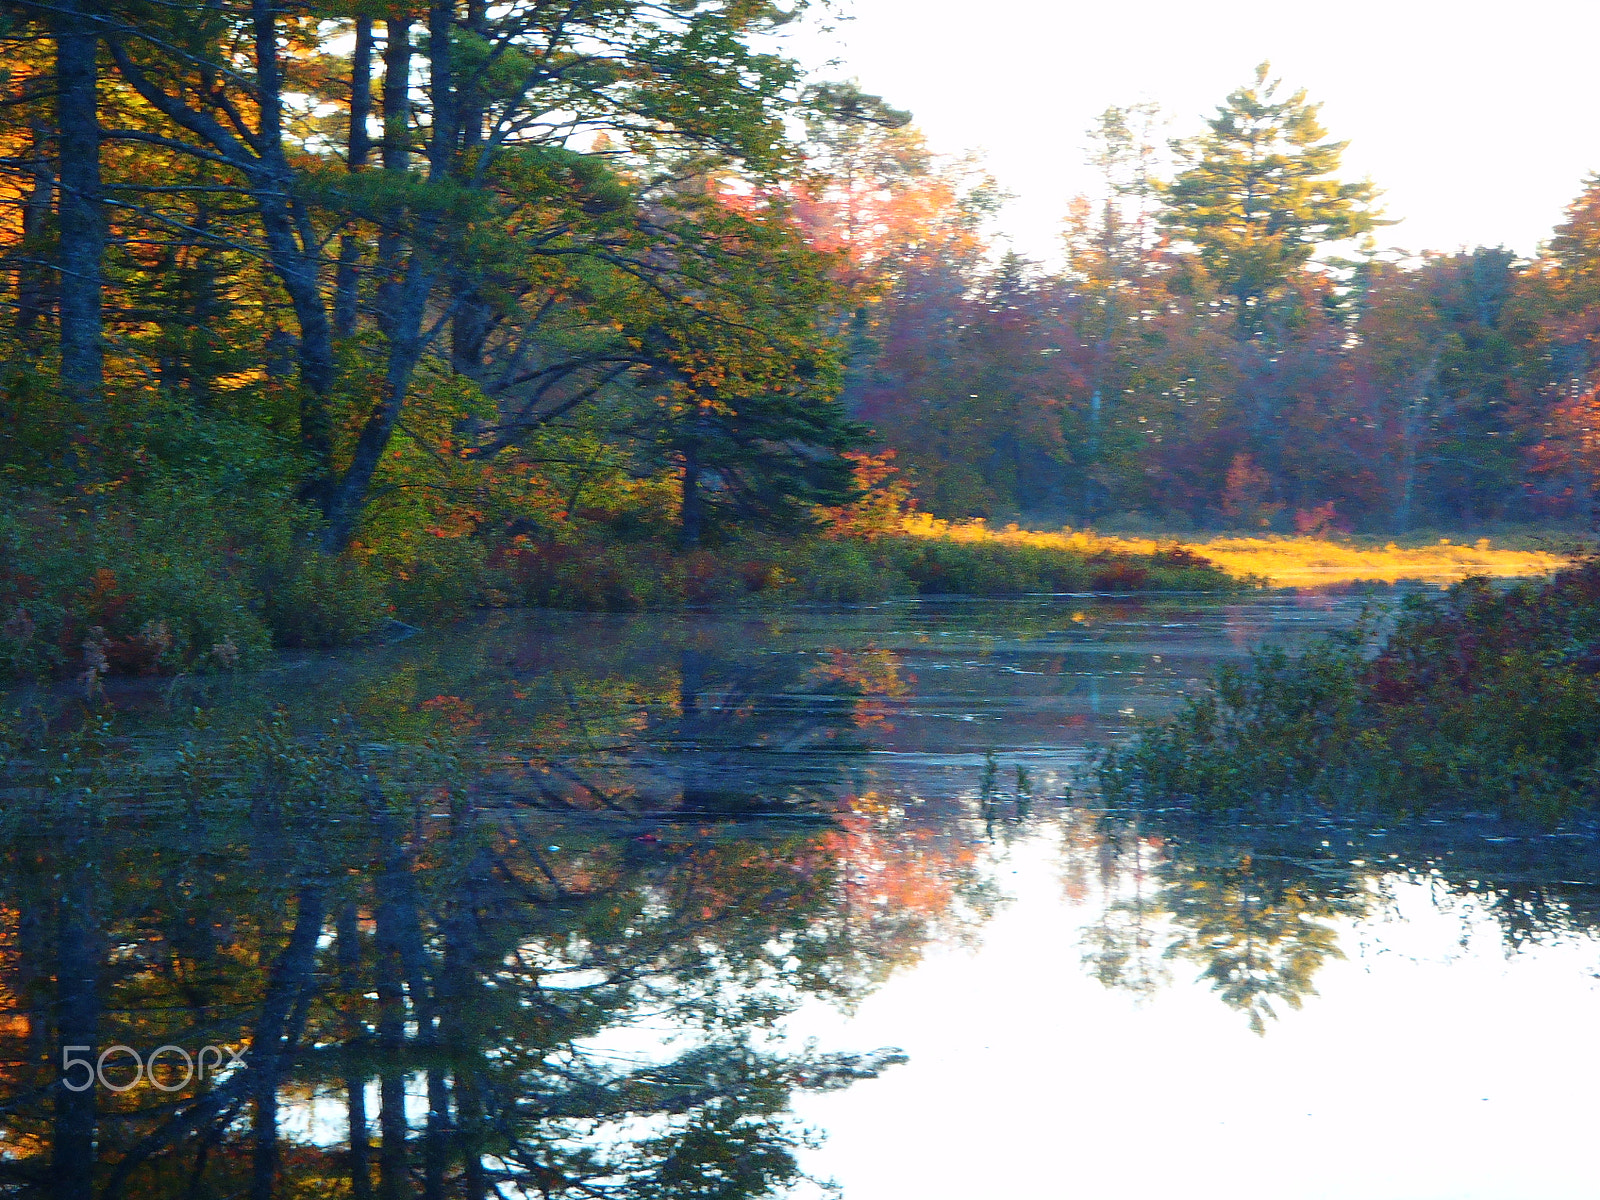 Olympus TG-610 sample photo. Canoeing in a stillwater at sunset photography